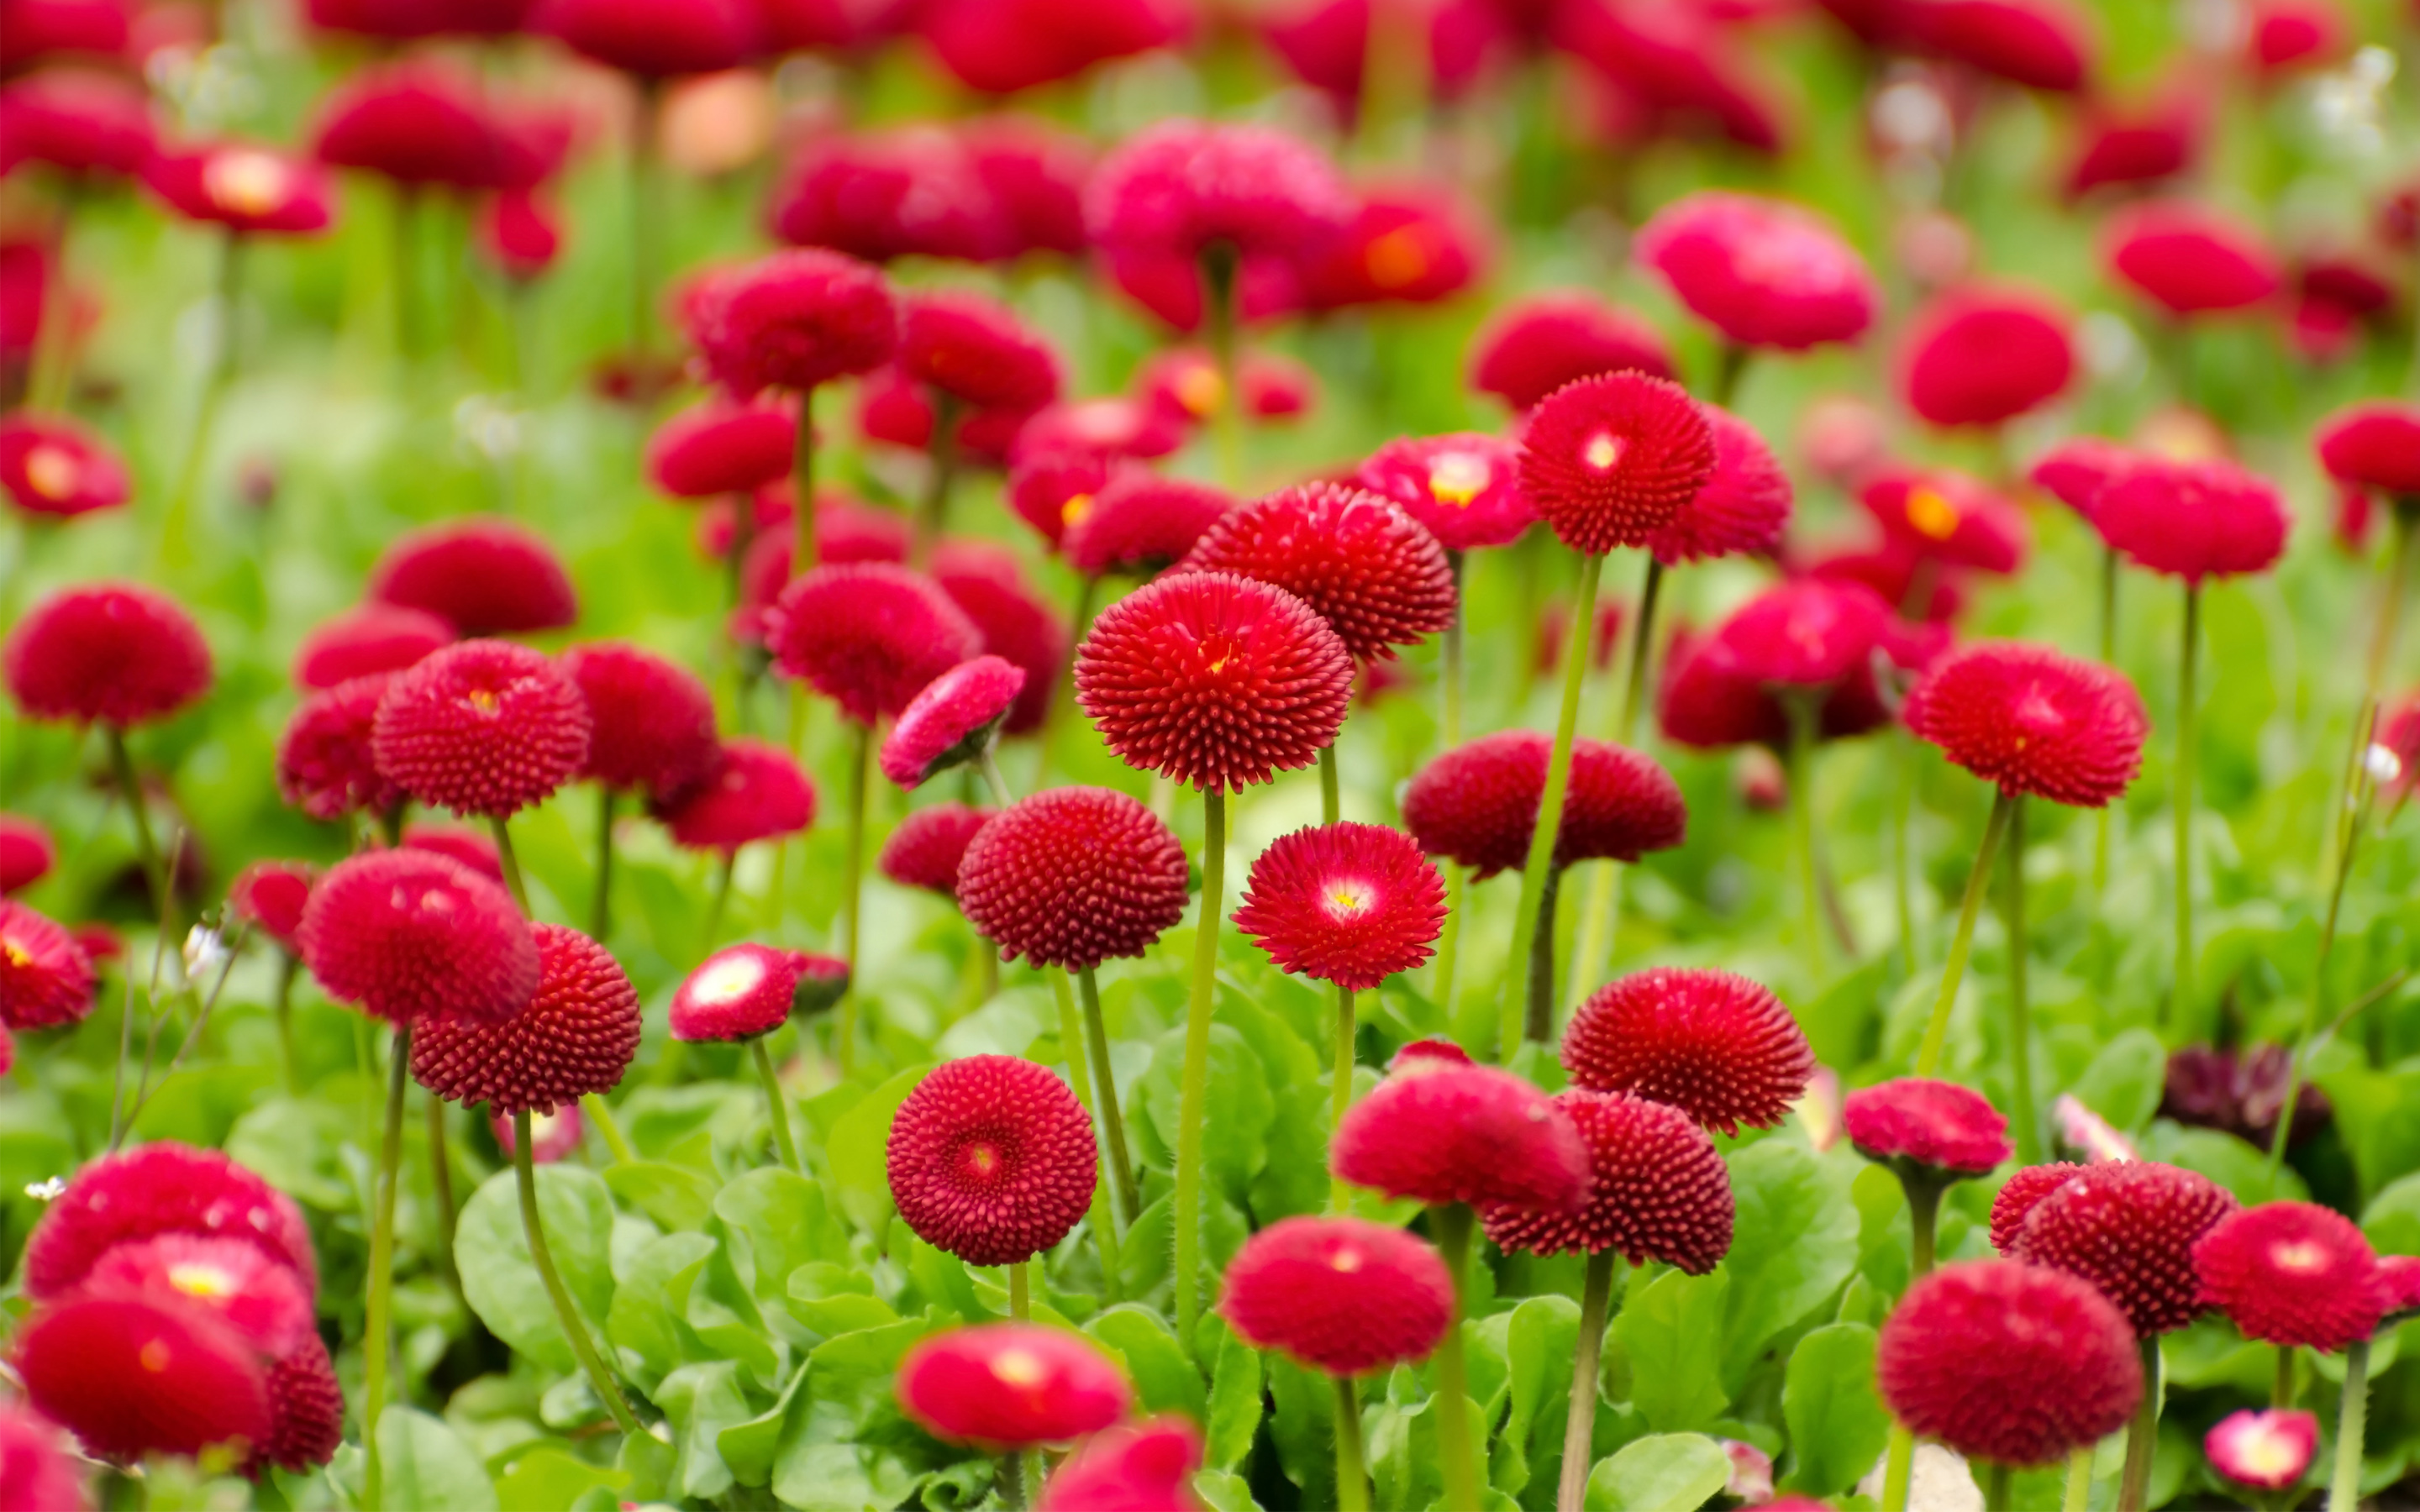 Gallery of 43 Red Flower Backgrounds, Wallpapers | B.SCB Wallpapers